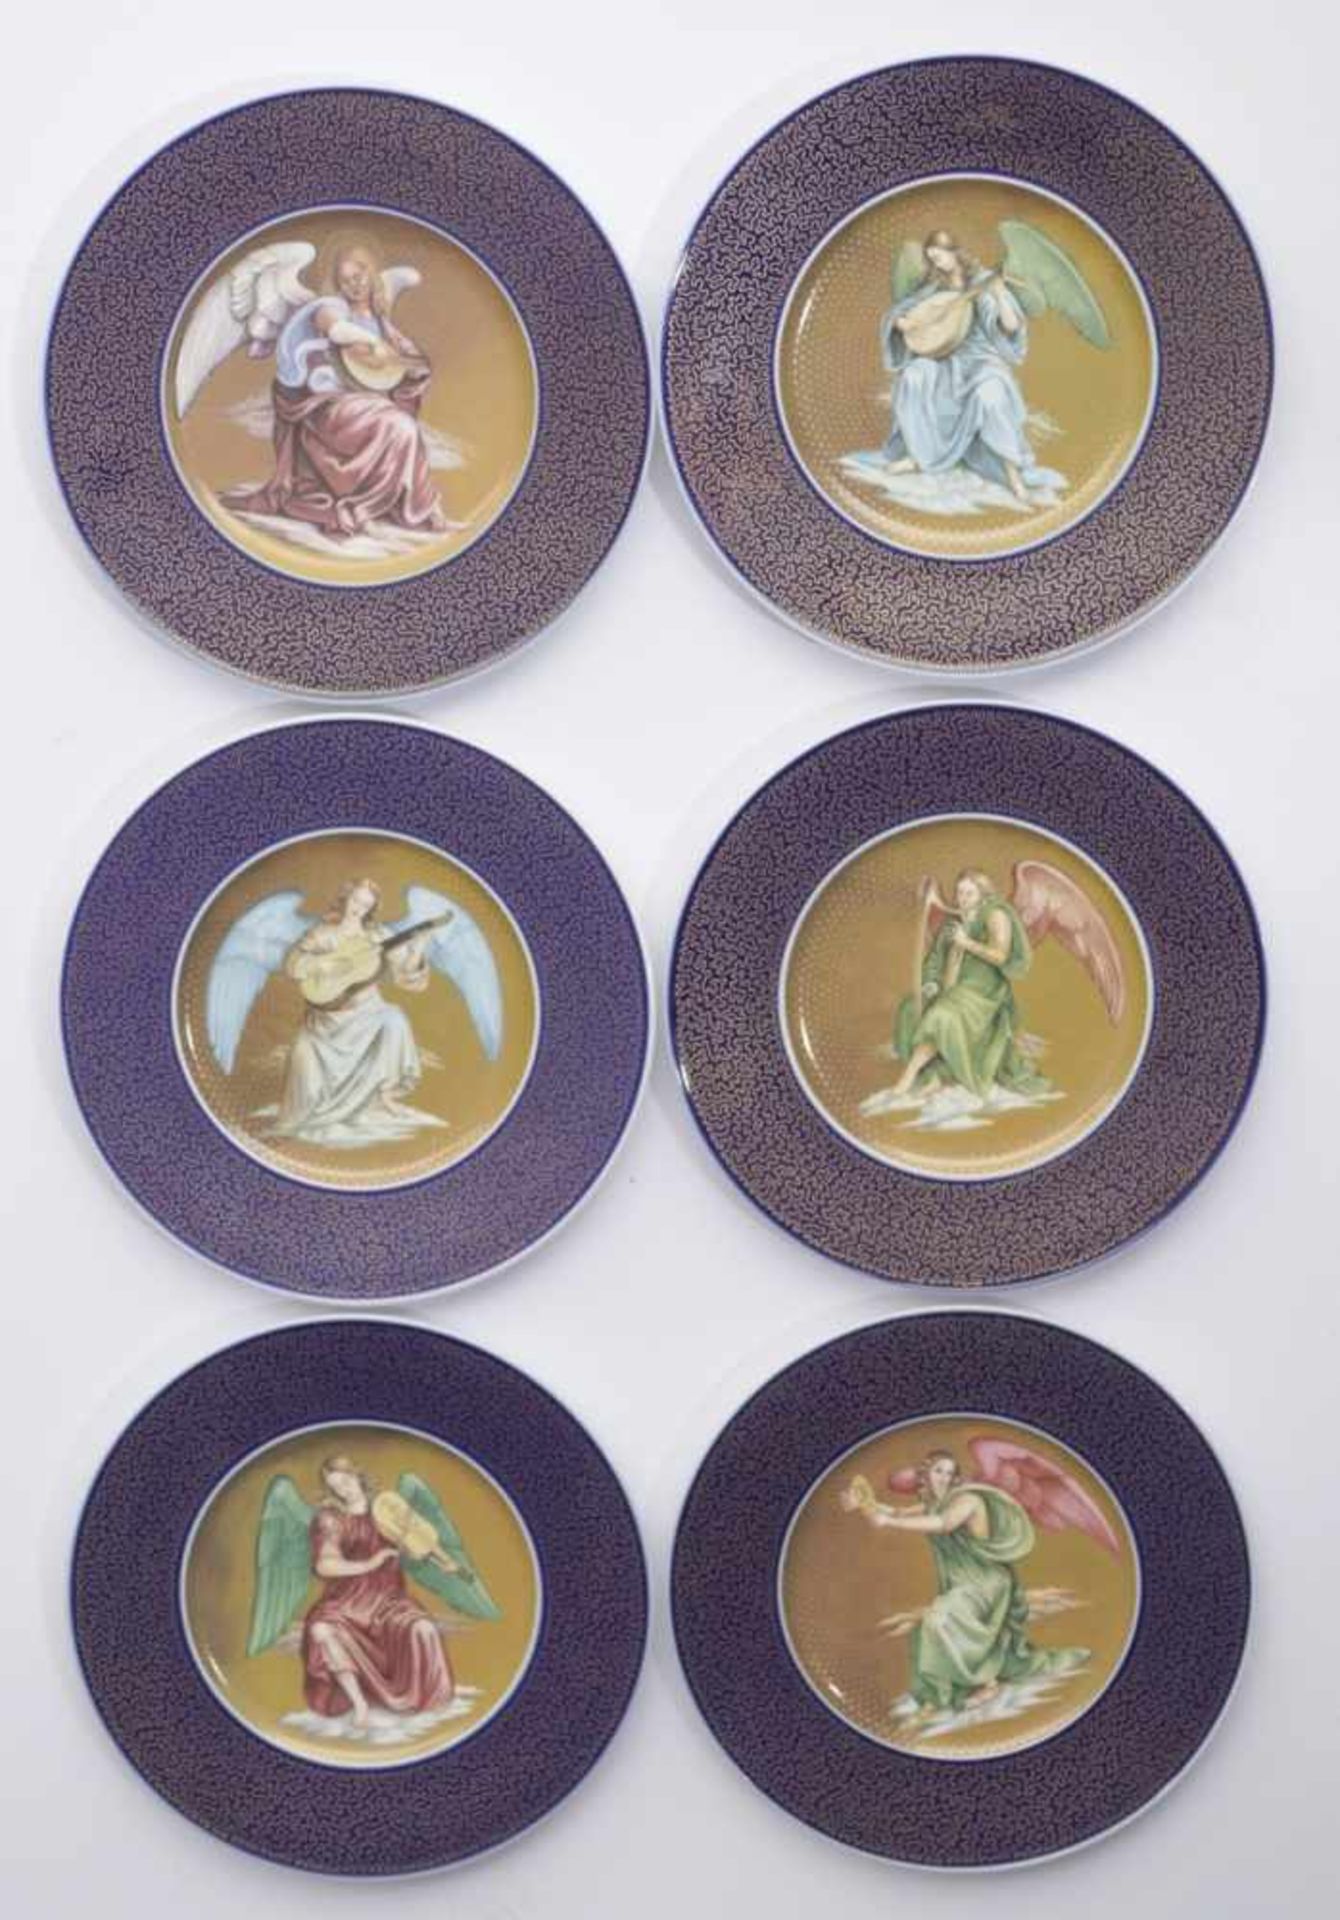 Six annual plates with motifs from the painting THE CHOSEN by Luca Signorelli, porcelain,